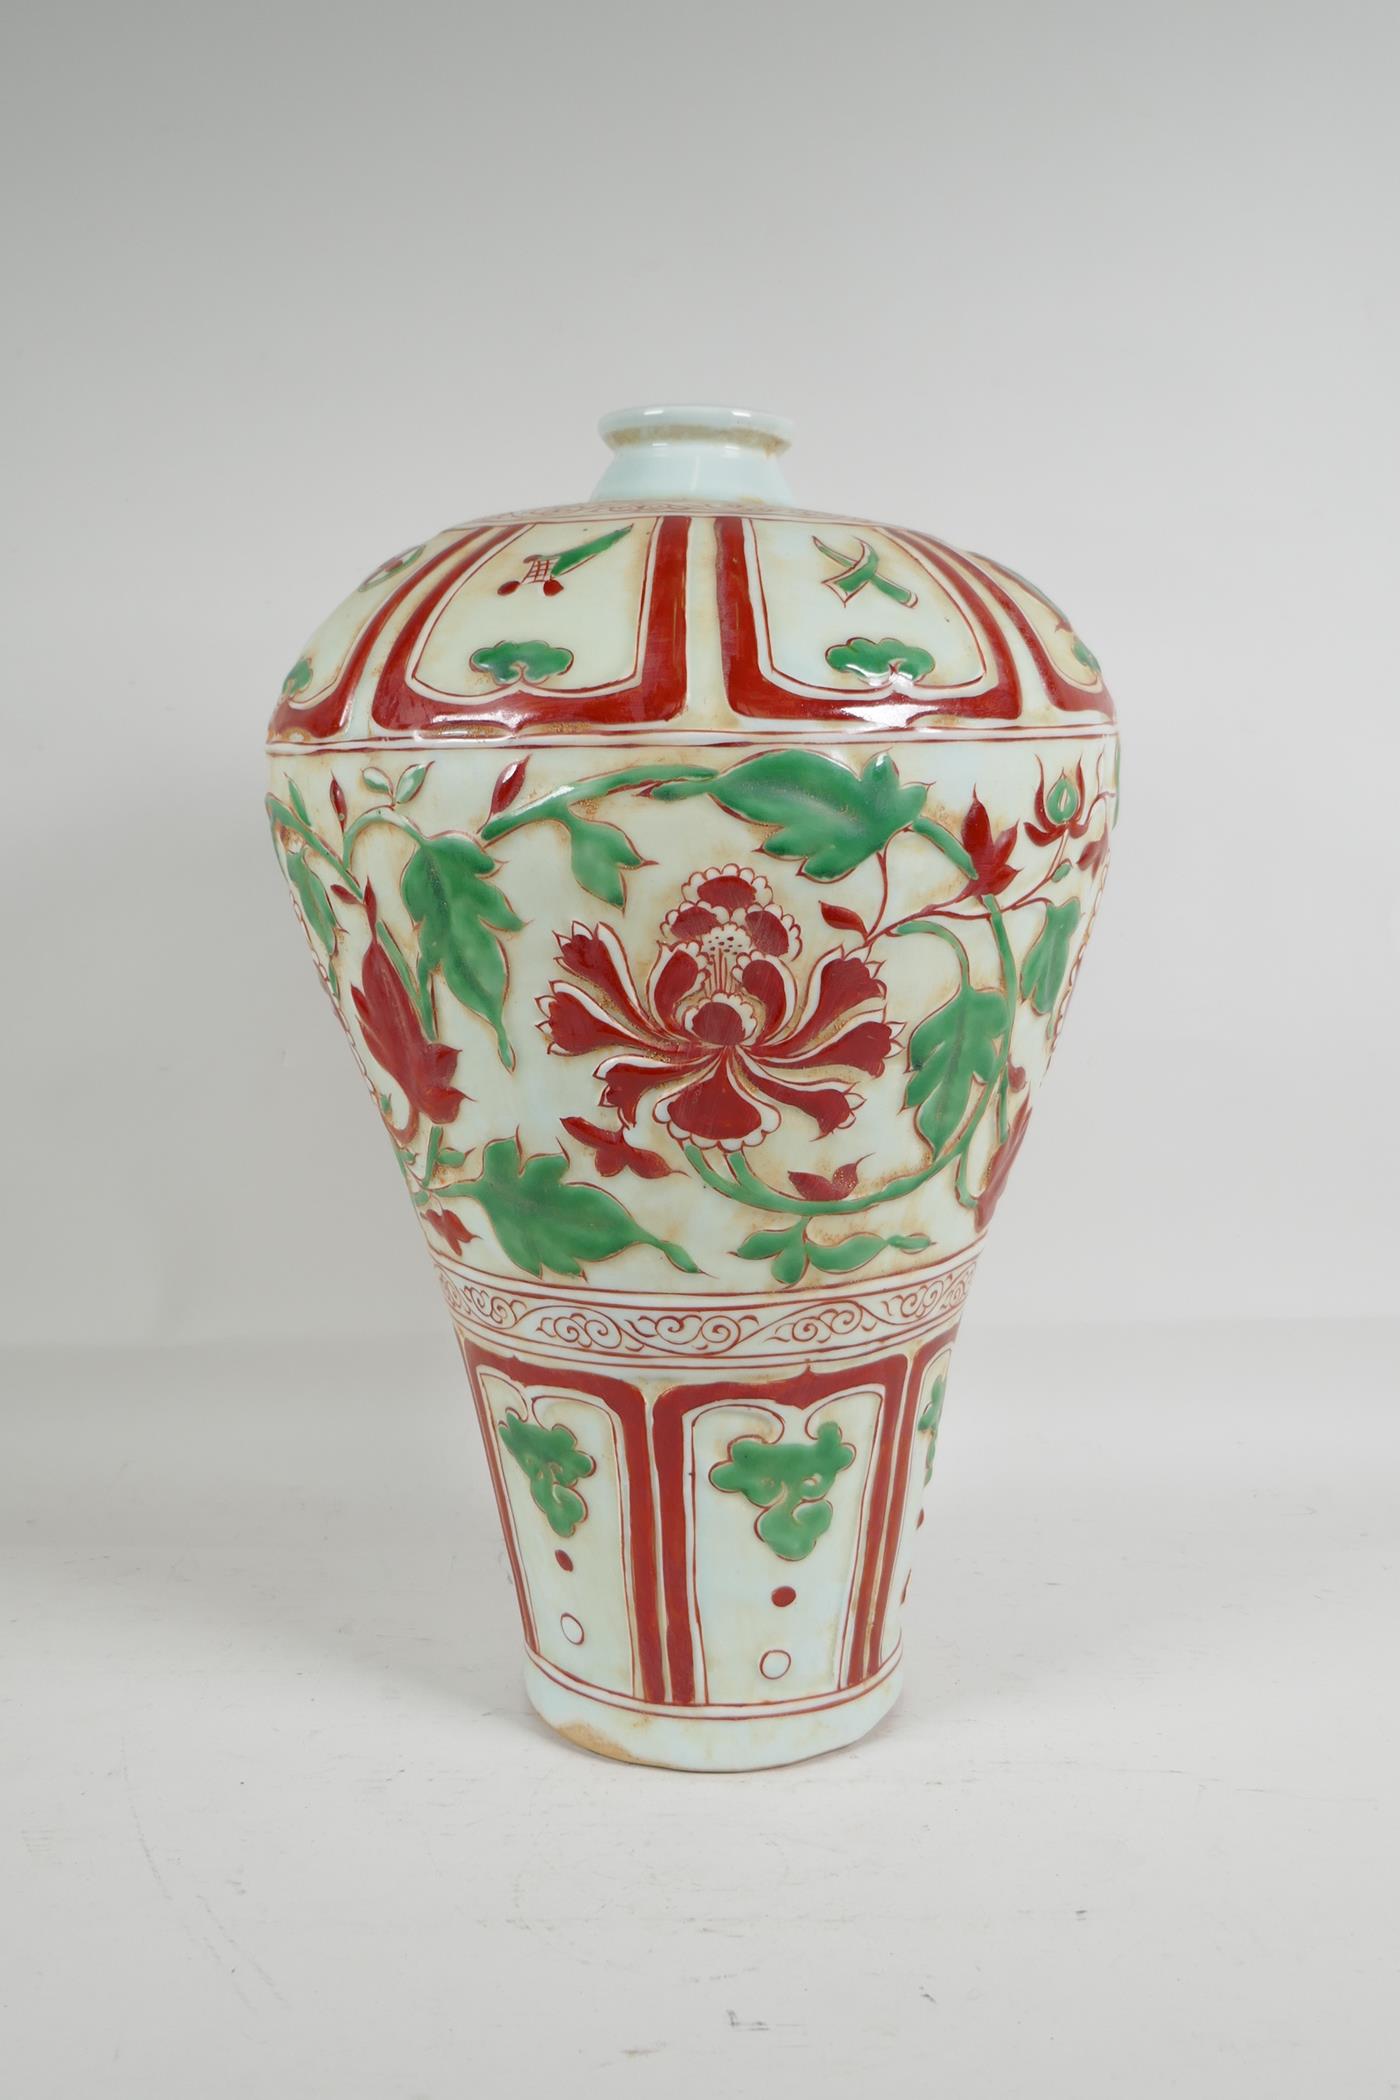 A Chinese red & green porcelain Meiping vase, with raised scrolling floral decoration, 15" high - Image 3 of 6